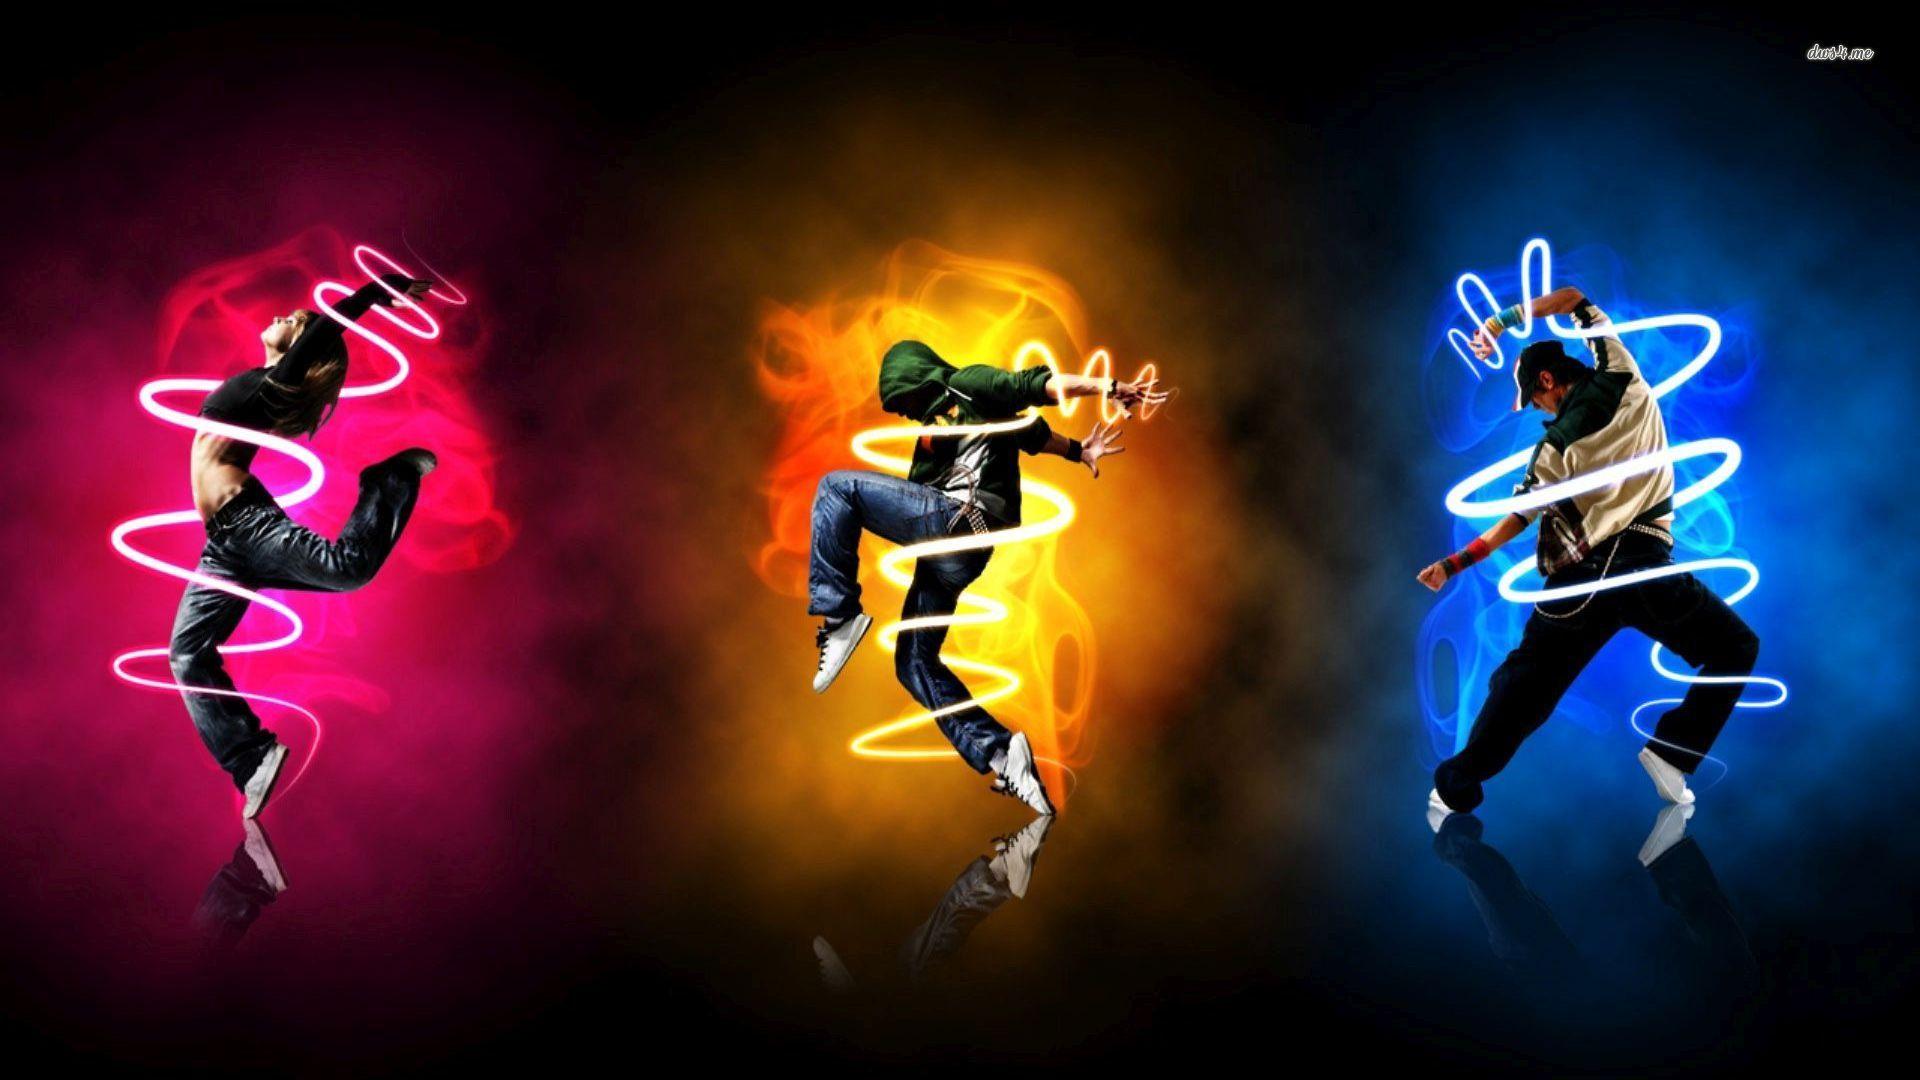 Download Dance wallpapers for mobile phone free Dance HD pictures